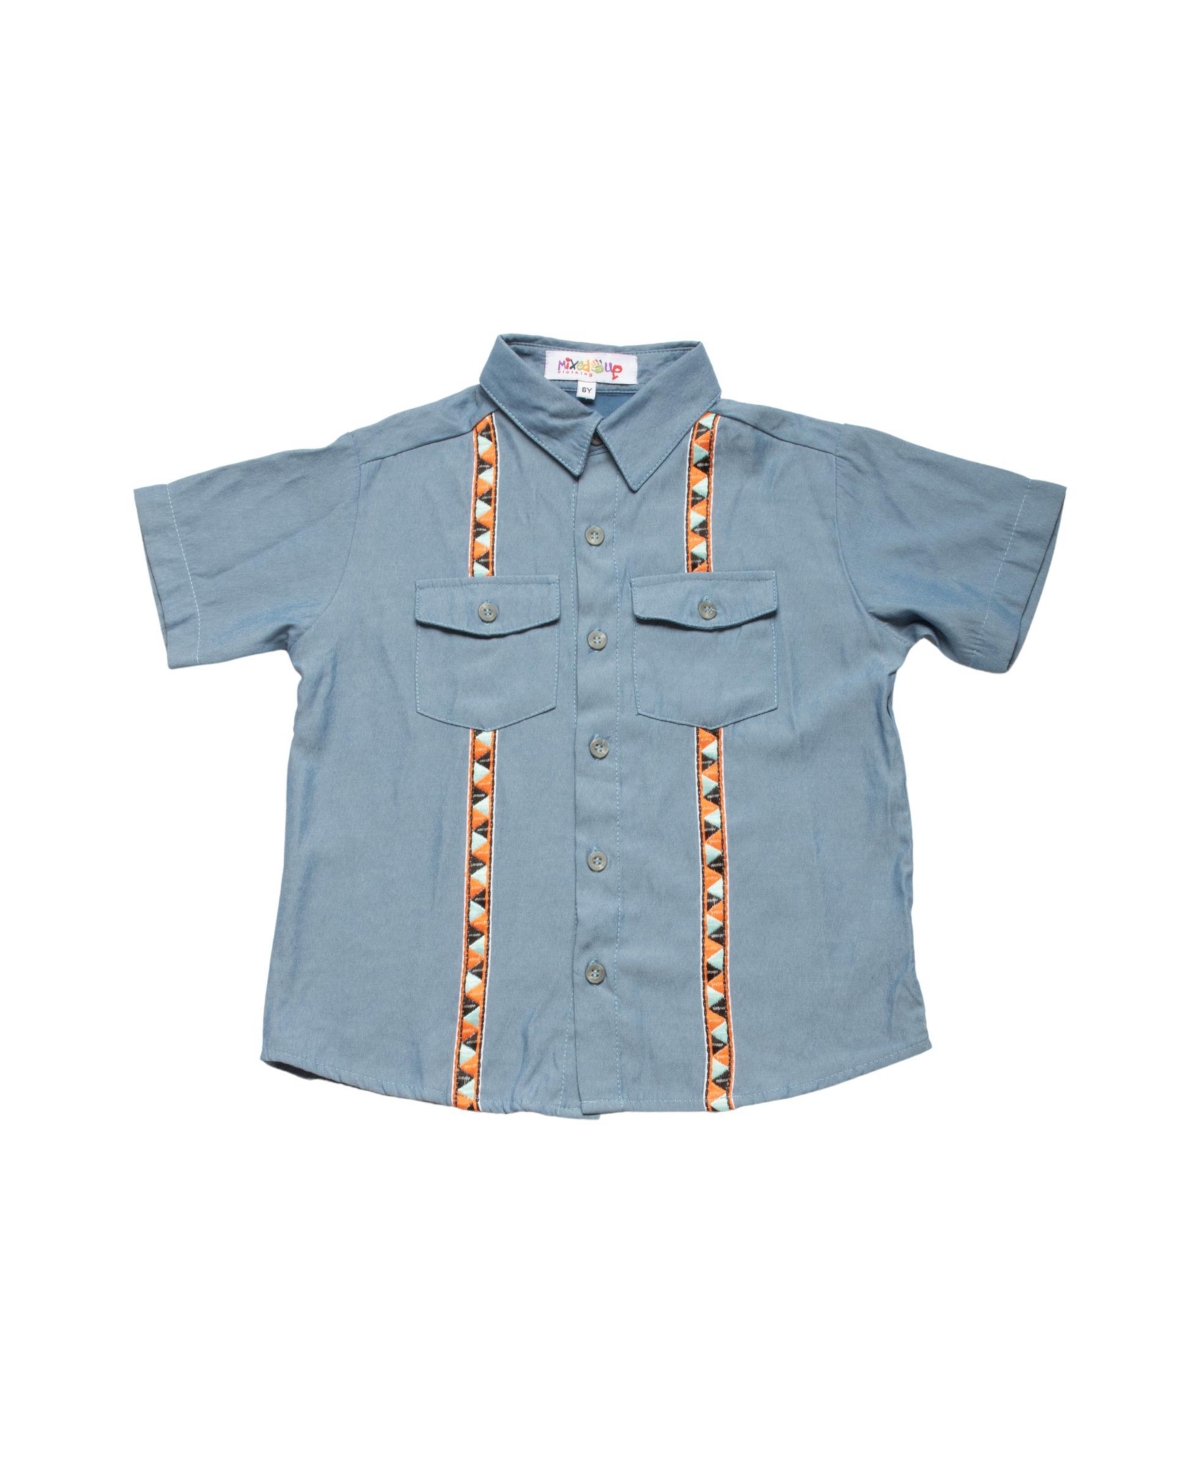 Mixed Up Clothing Babies' Big Boys Short Sleeves Button Down Pocket Shirt In Light Blue